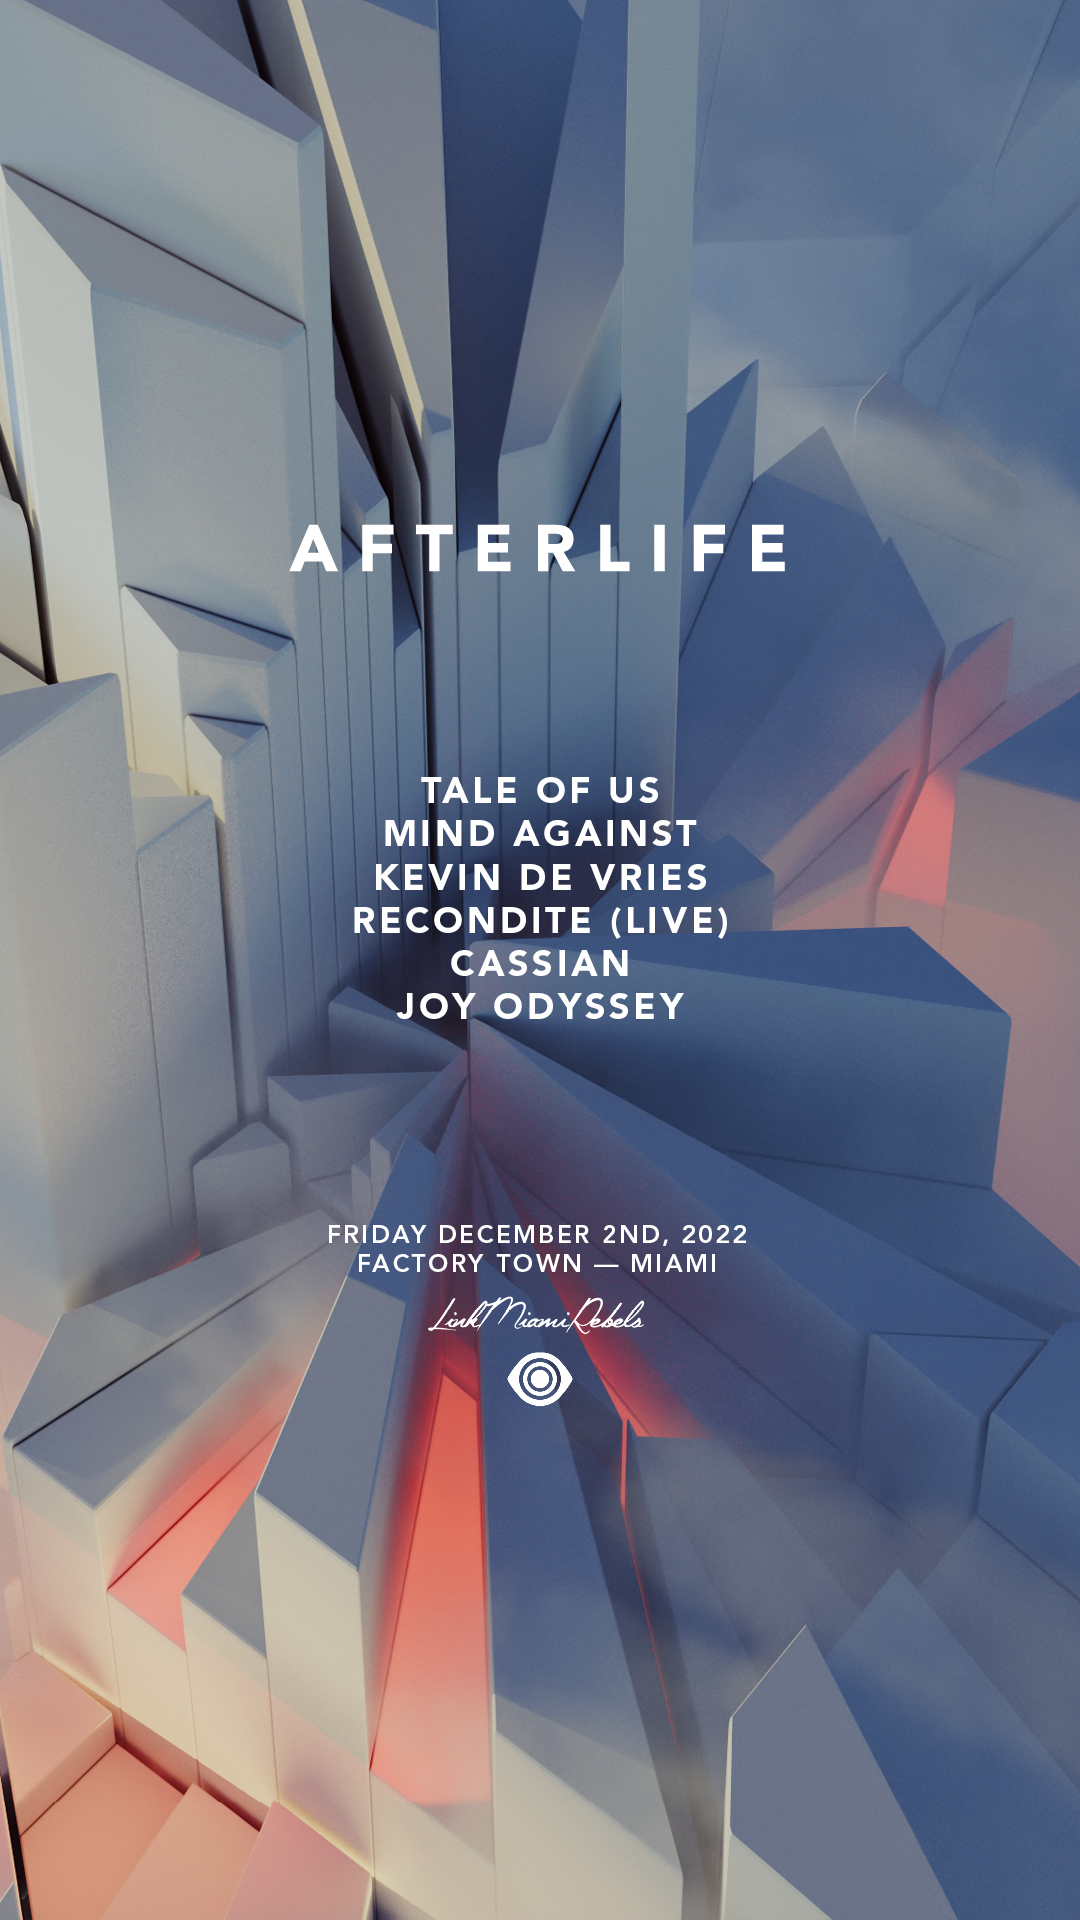 Afterlife Lineup - Miami Music Week : r/aves